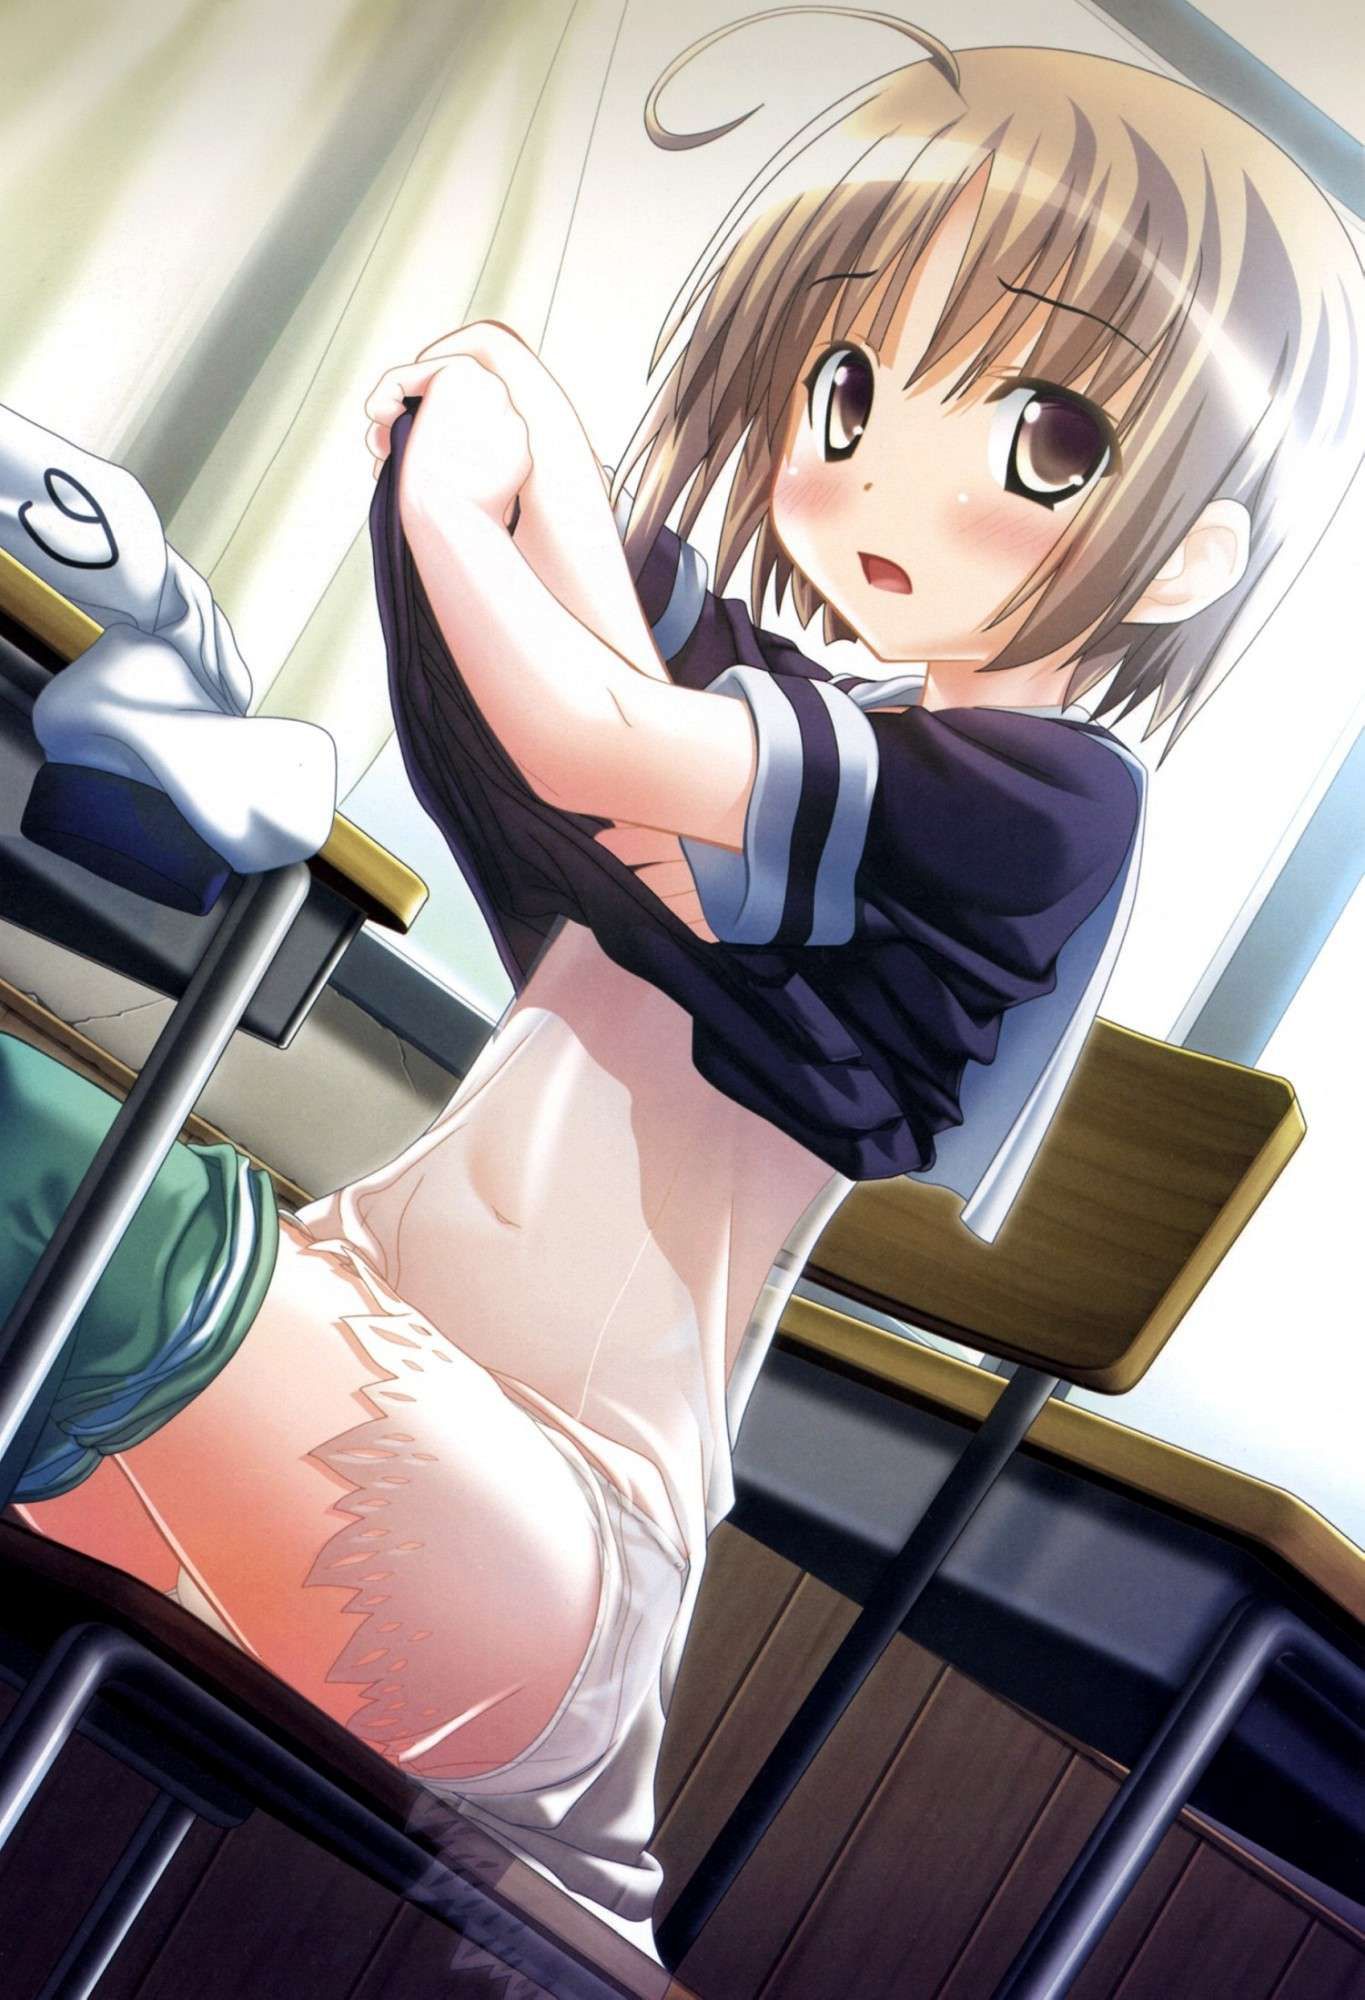 Lucky lewd image that came across a girl changing clothes please 8